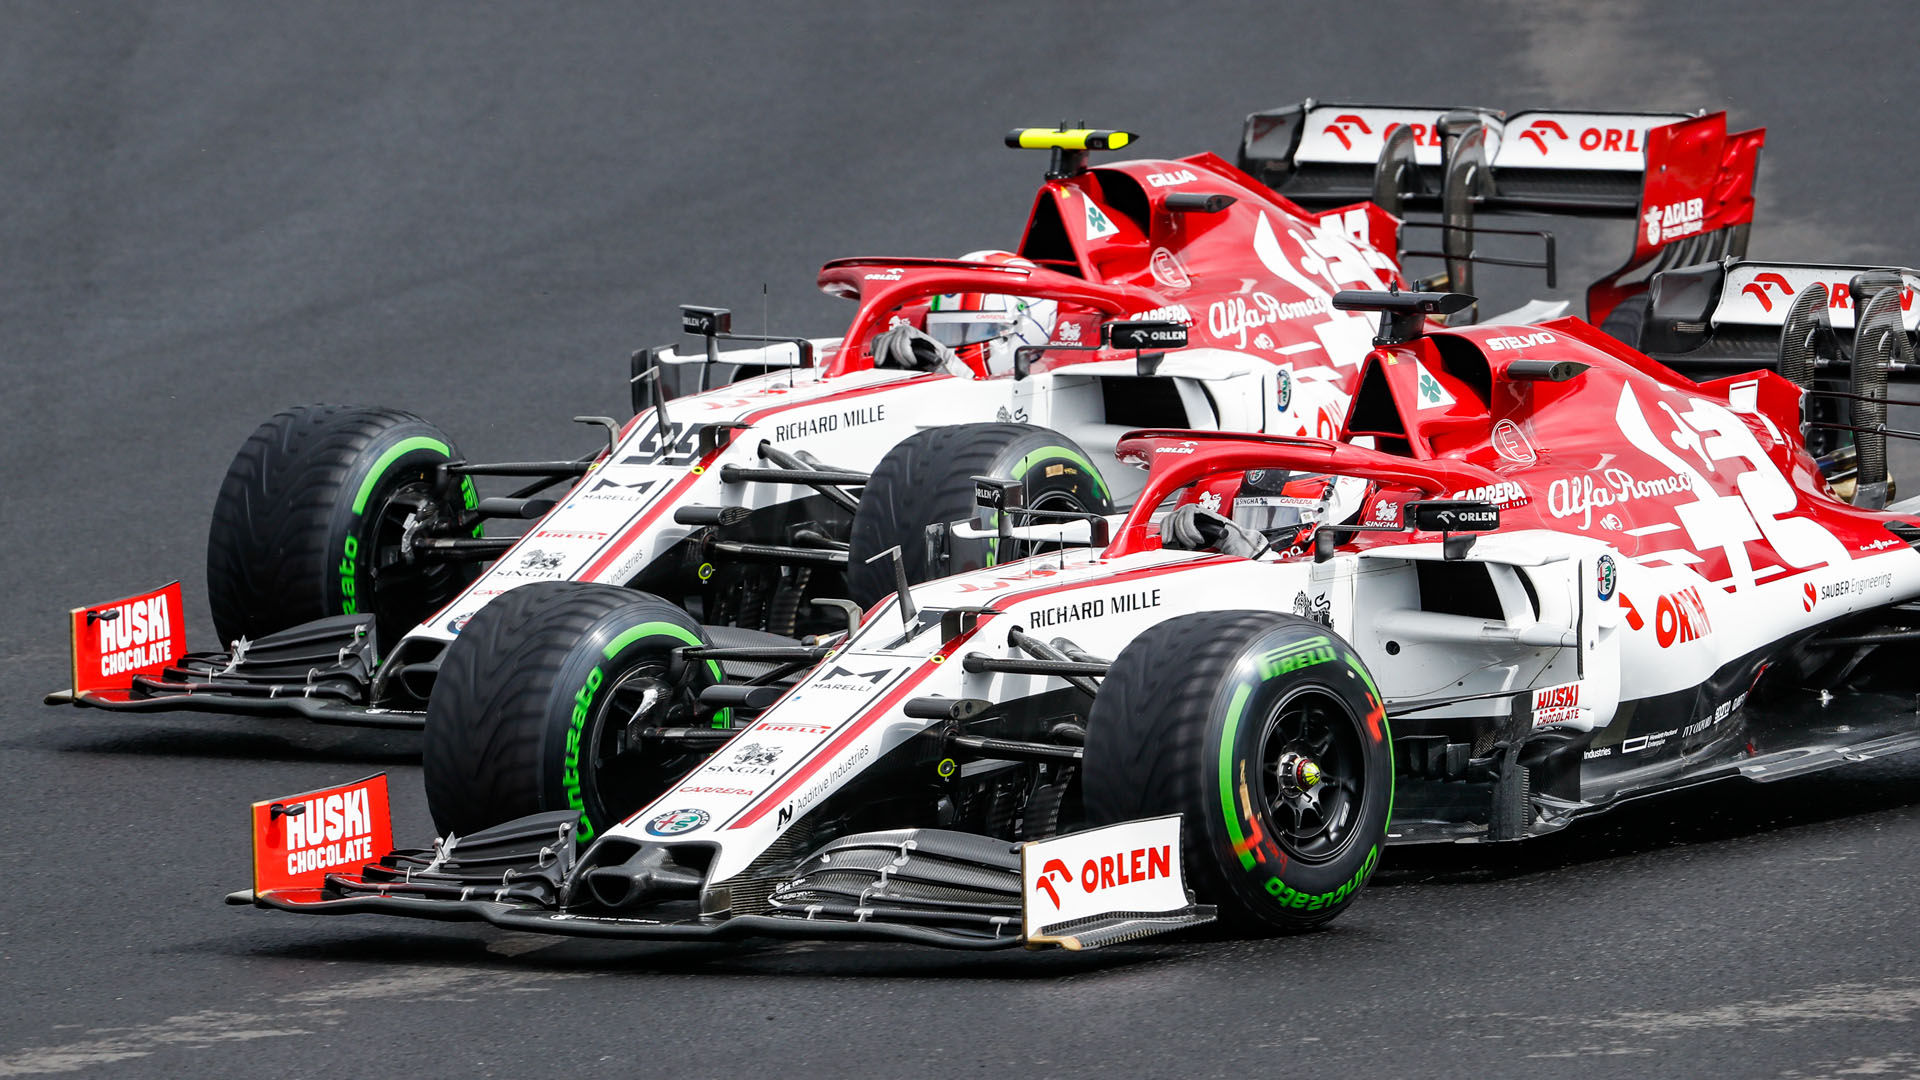 Arctic clue infrastructure ANALYSIS: Why Alfa Romeo kept Raikkonen and Giovinazzi for 2021 – and what  does it mean for Schumacher? | Formula 1®